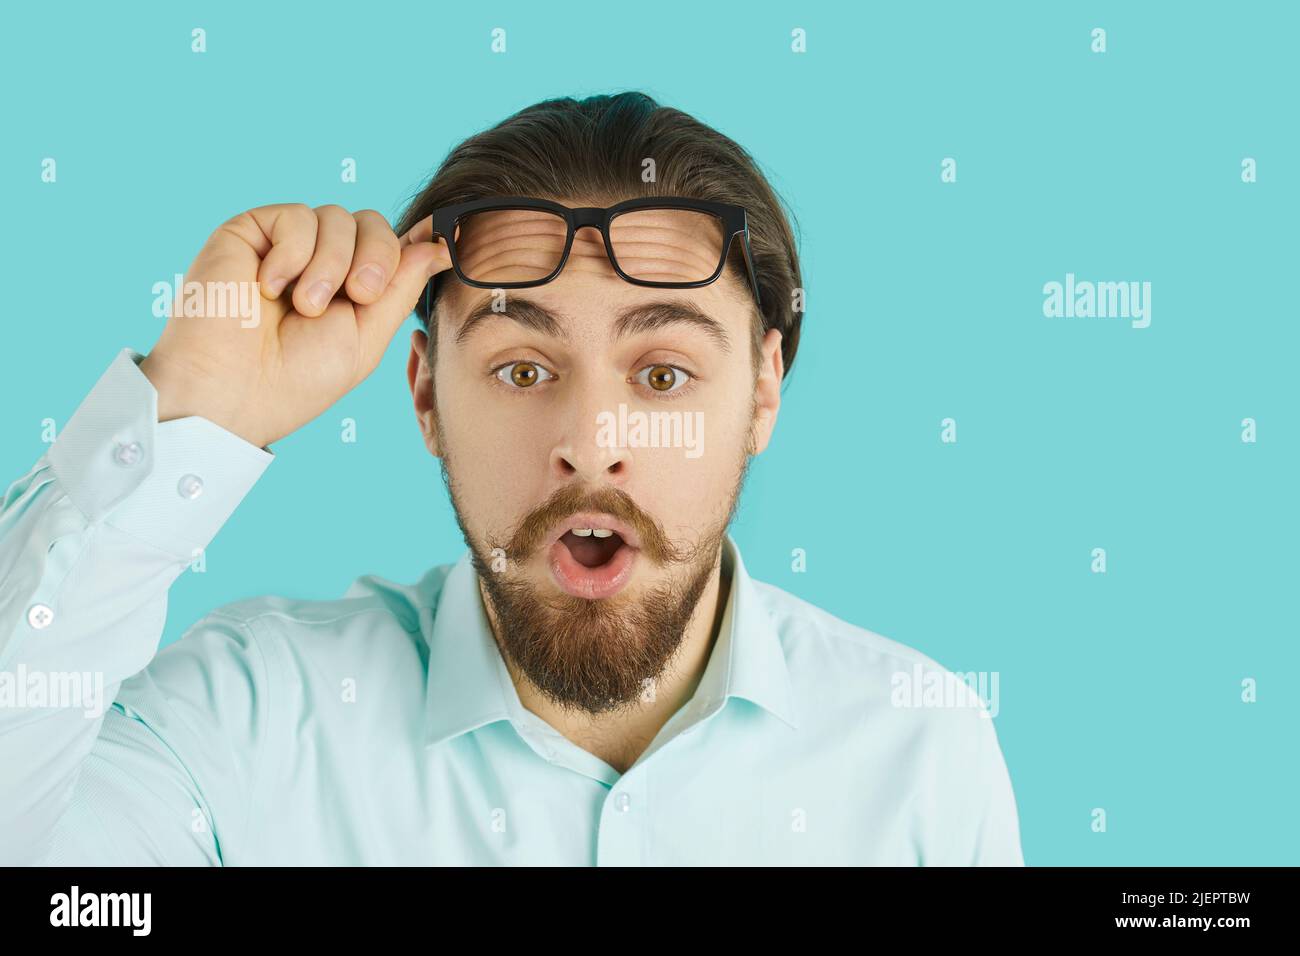 Young man lifts his glasses and looks at something with funny astonished face expression Stock Photo